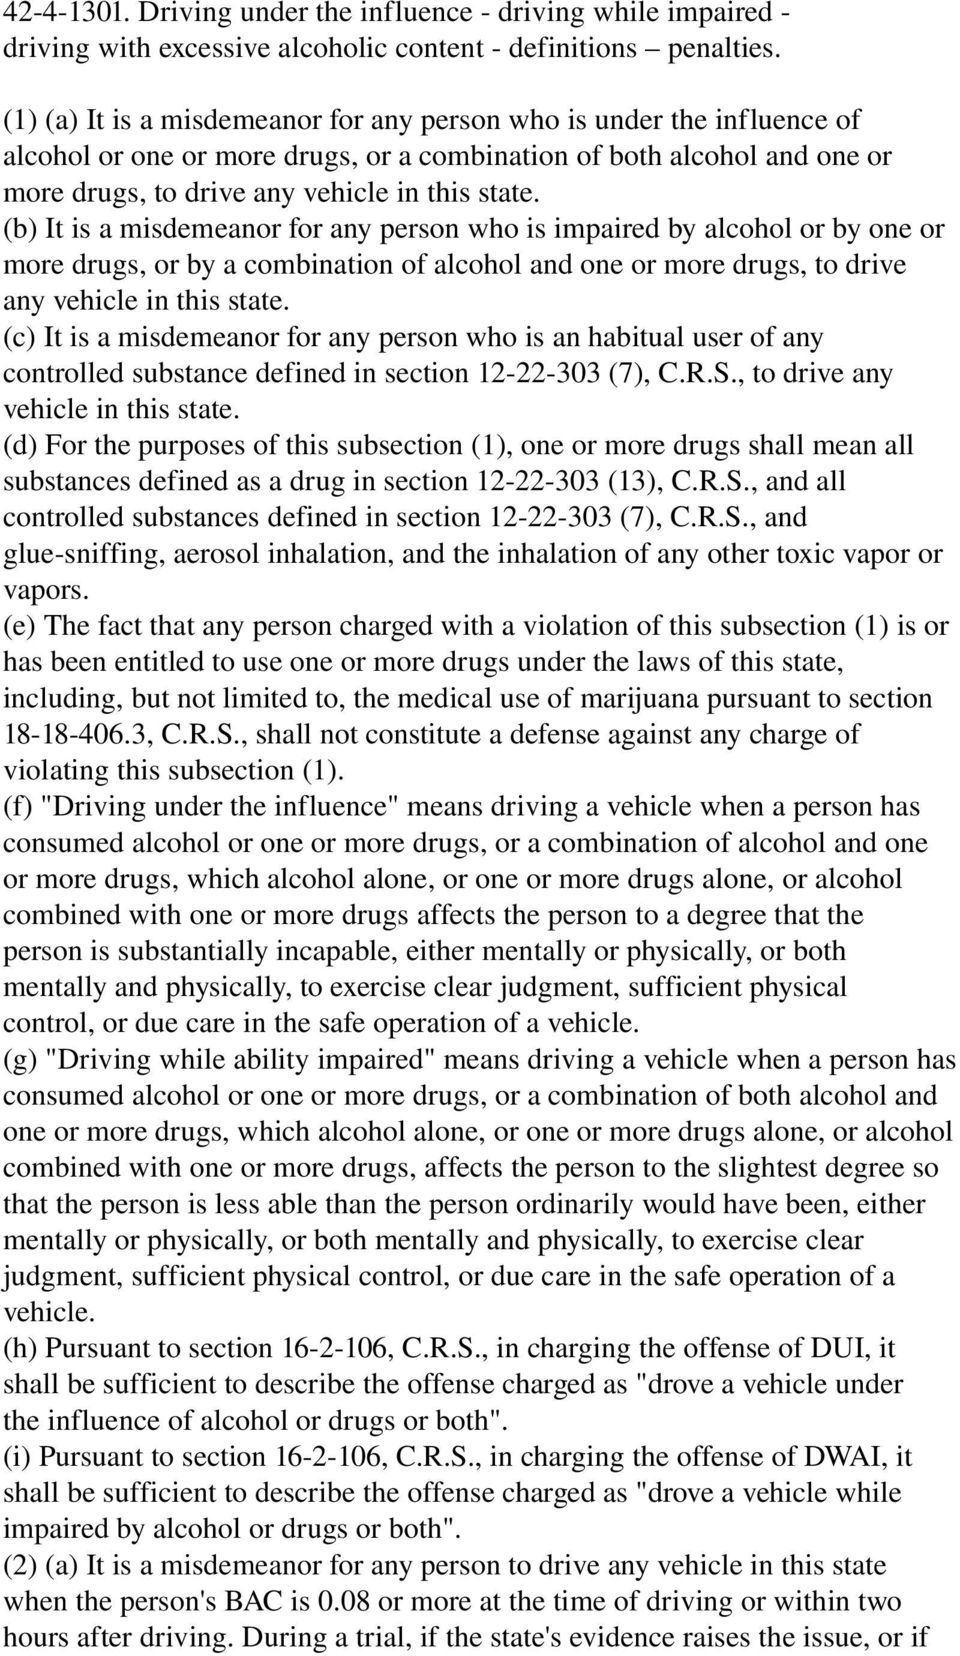 (b) It is a misdemeanor for any person who is impaired by alcohol or by one or more drugs, or by a combination of alcohol and one or more drugs, to drive any vehicle in this state.